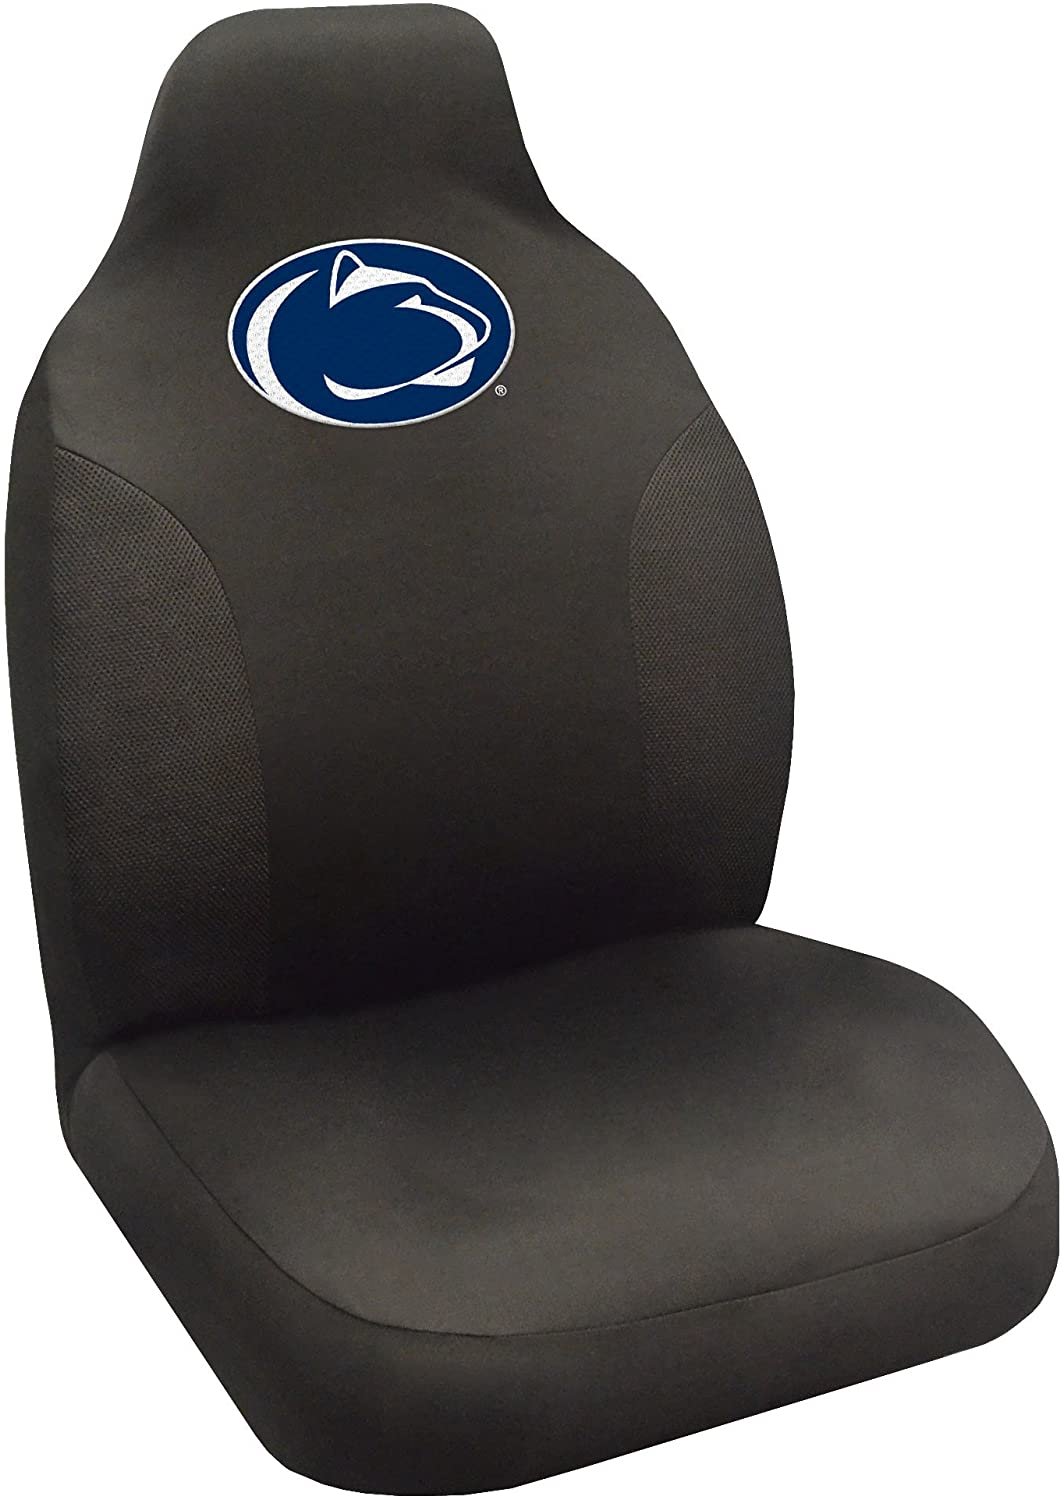 FANMATS - 15086 NCAA Penn State Nittany Lions Polyester Seat Cover